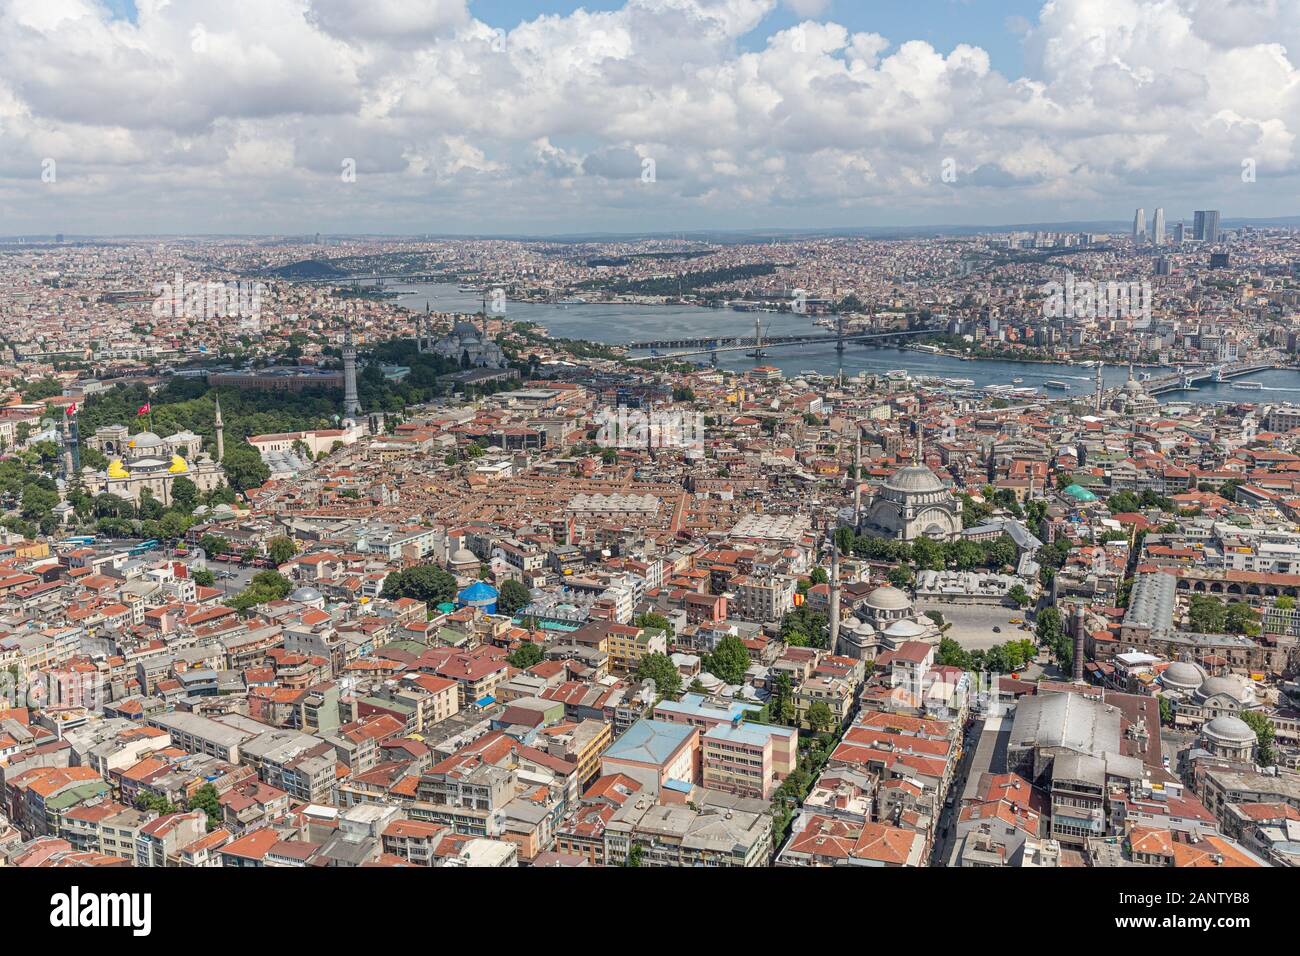 Istanbul aerial photo; Sultanahmet Square, Cemberlitas, Grand Bazaar, Beyazit Square, view from helicopter. Stock Photo